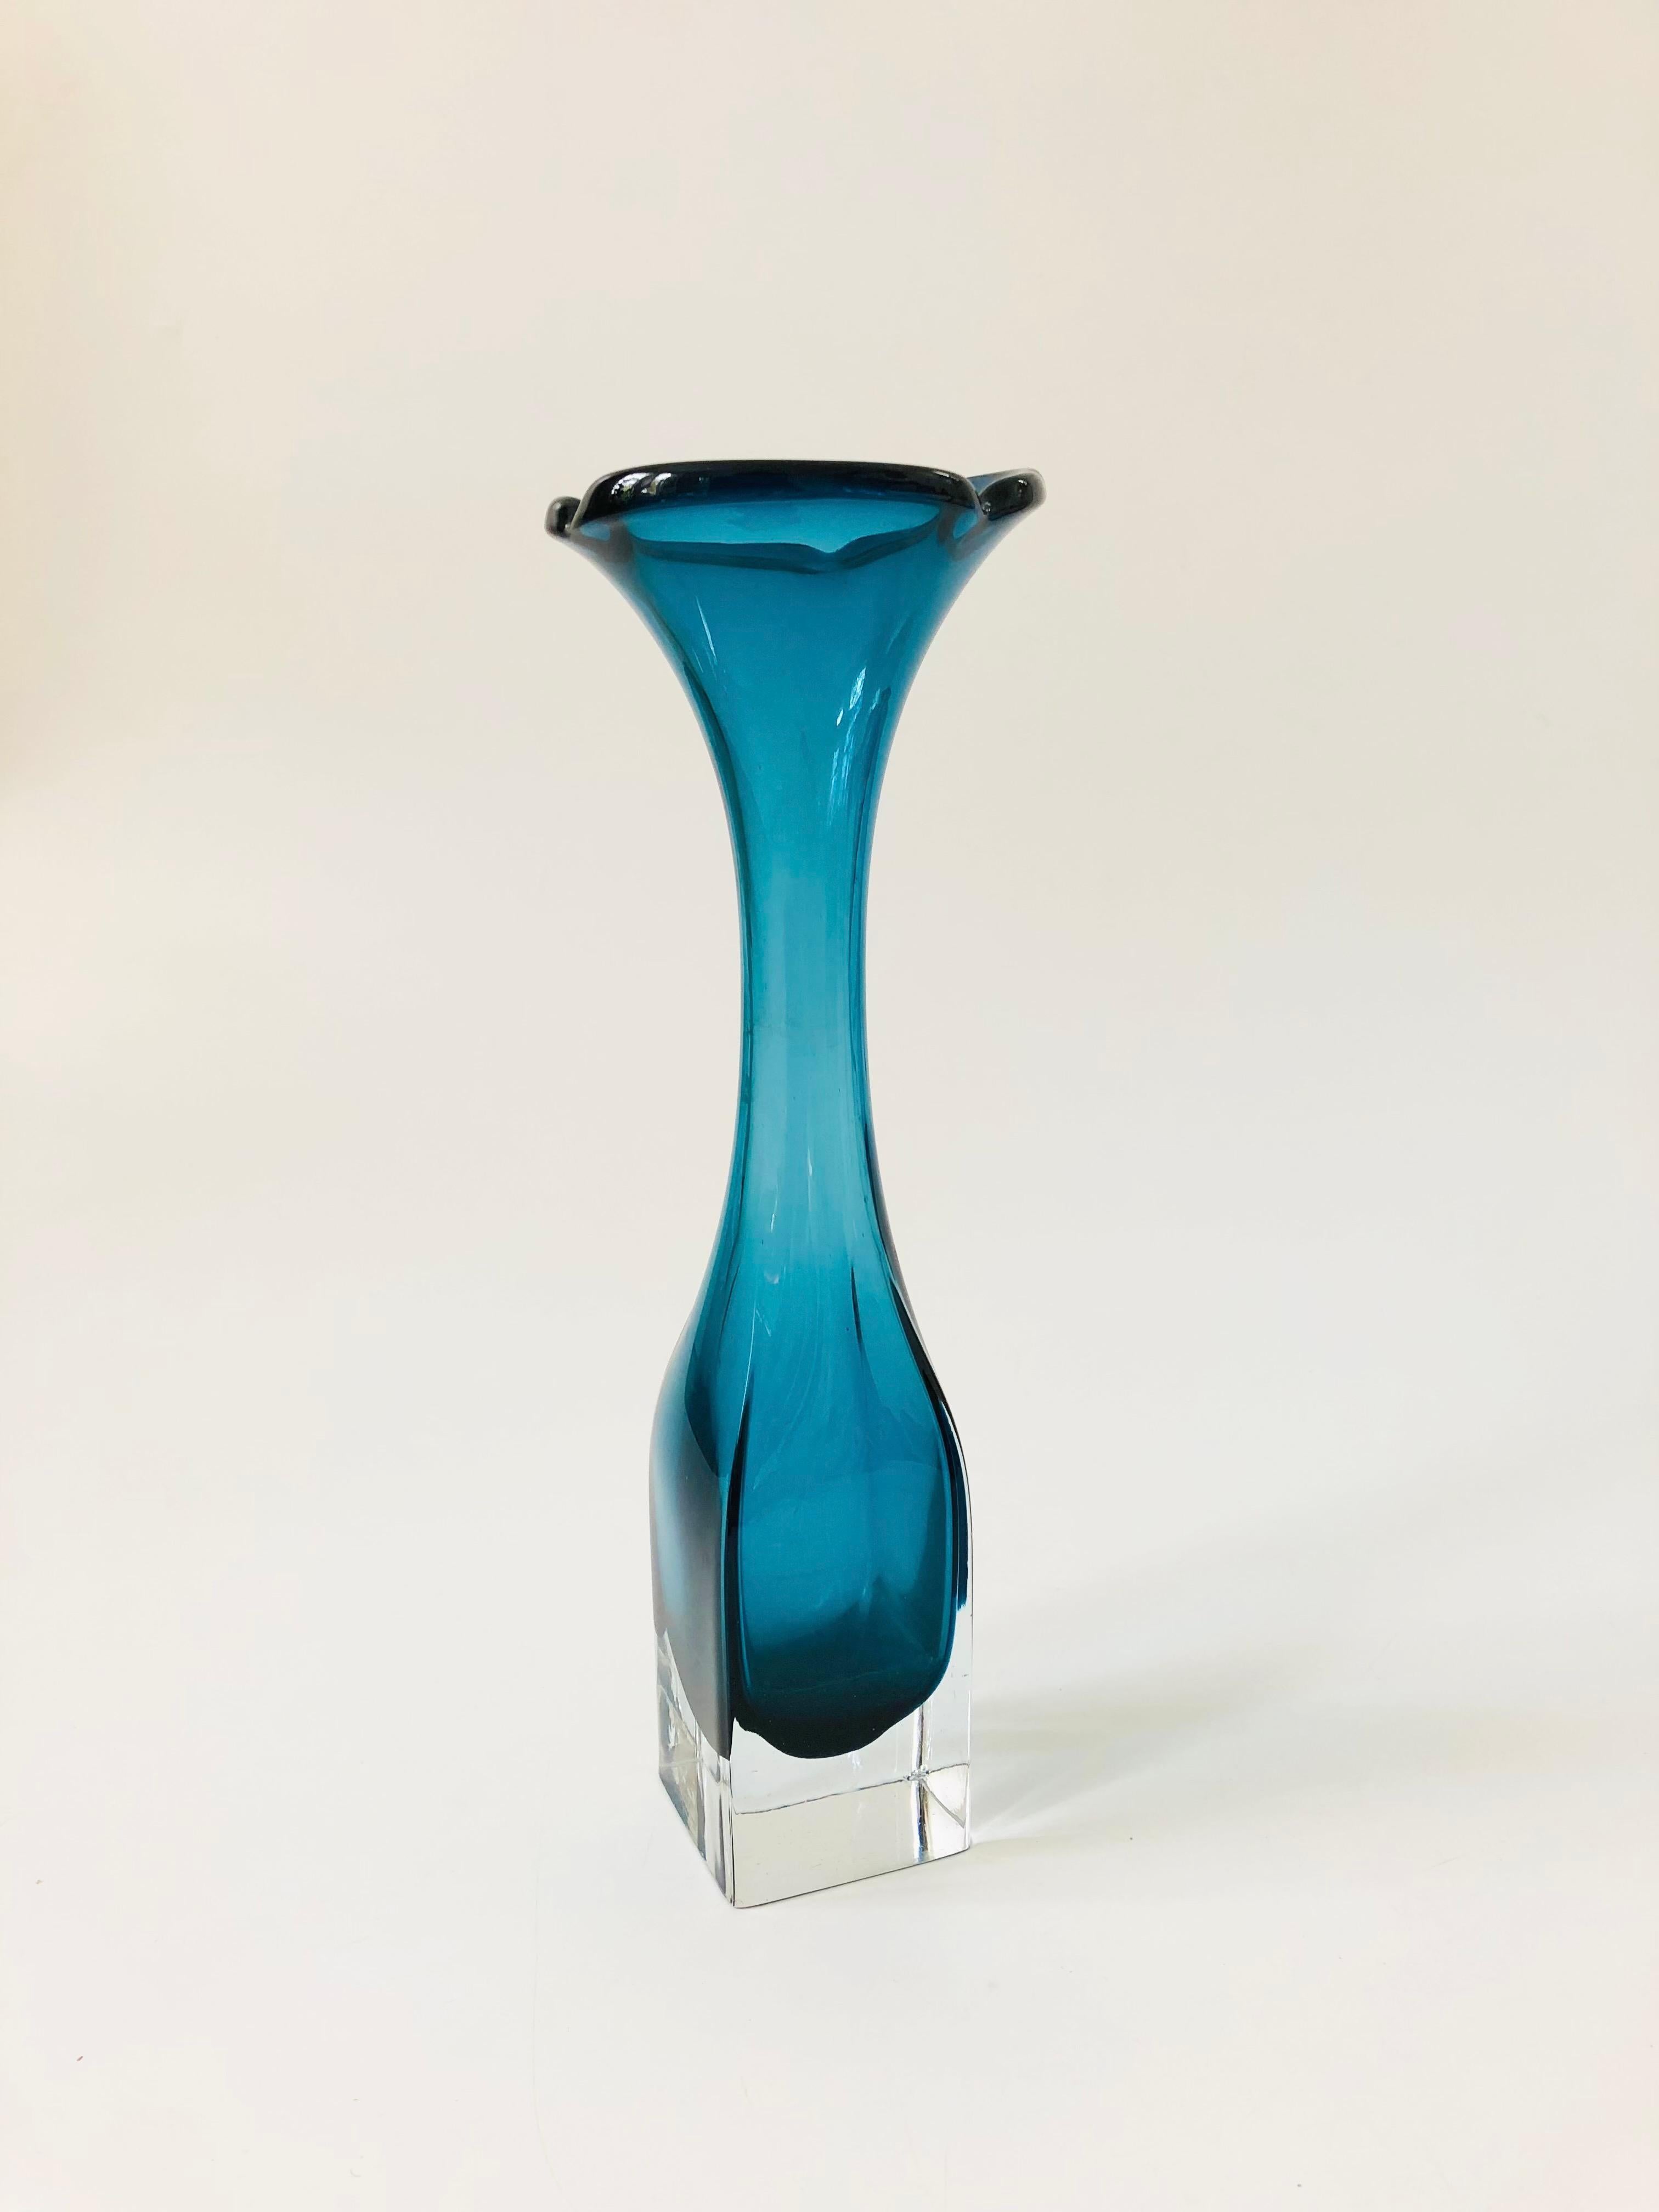 A beautiful mid century Swedish art glass vase, designed by Bo Borgstrom for Aseda Glasbruk in the 1960s. Beautiful deep blue color to the interior which is encased in thick clear glass. An organic shaped top contrasts nicely with a blocky square